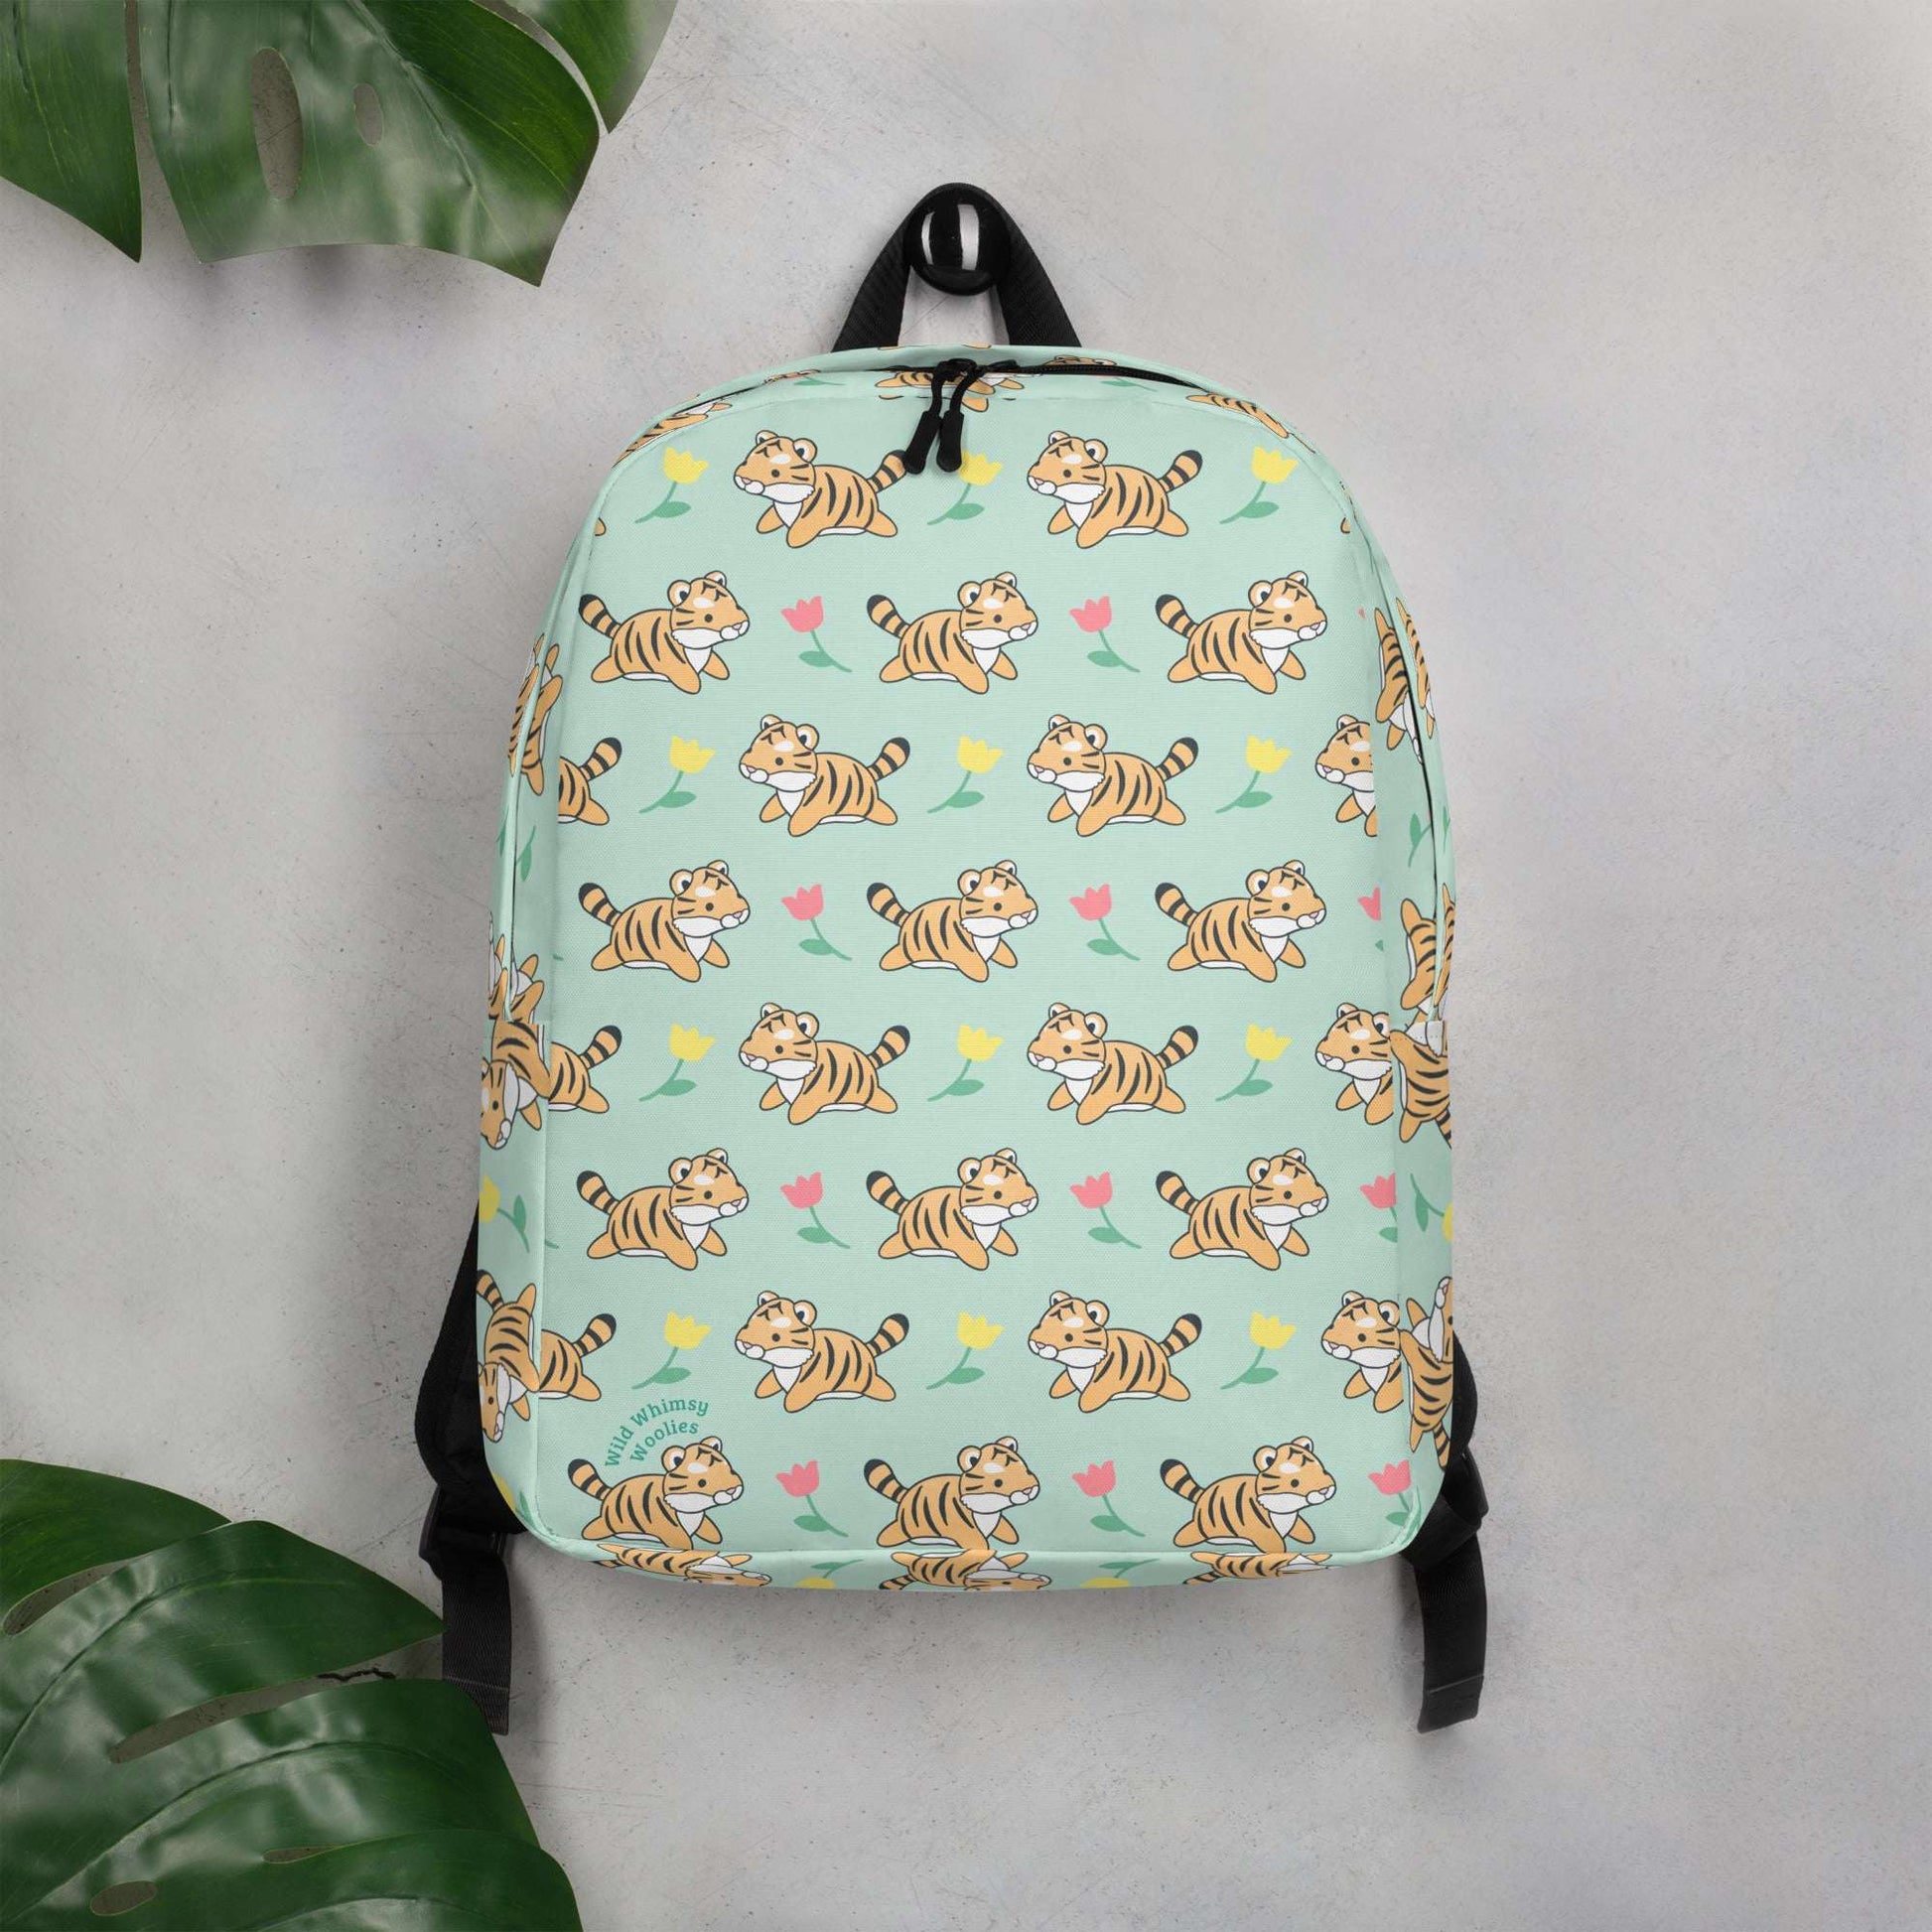 Leaping Tiger Minimalist Backpack - Green by Wild Whimsy Woolies